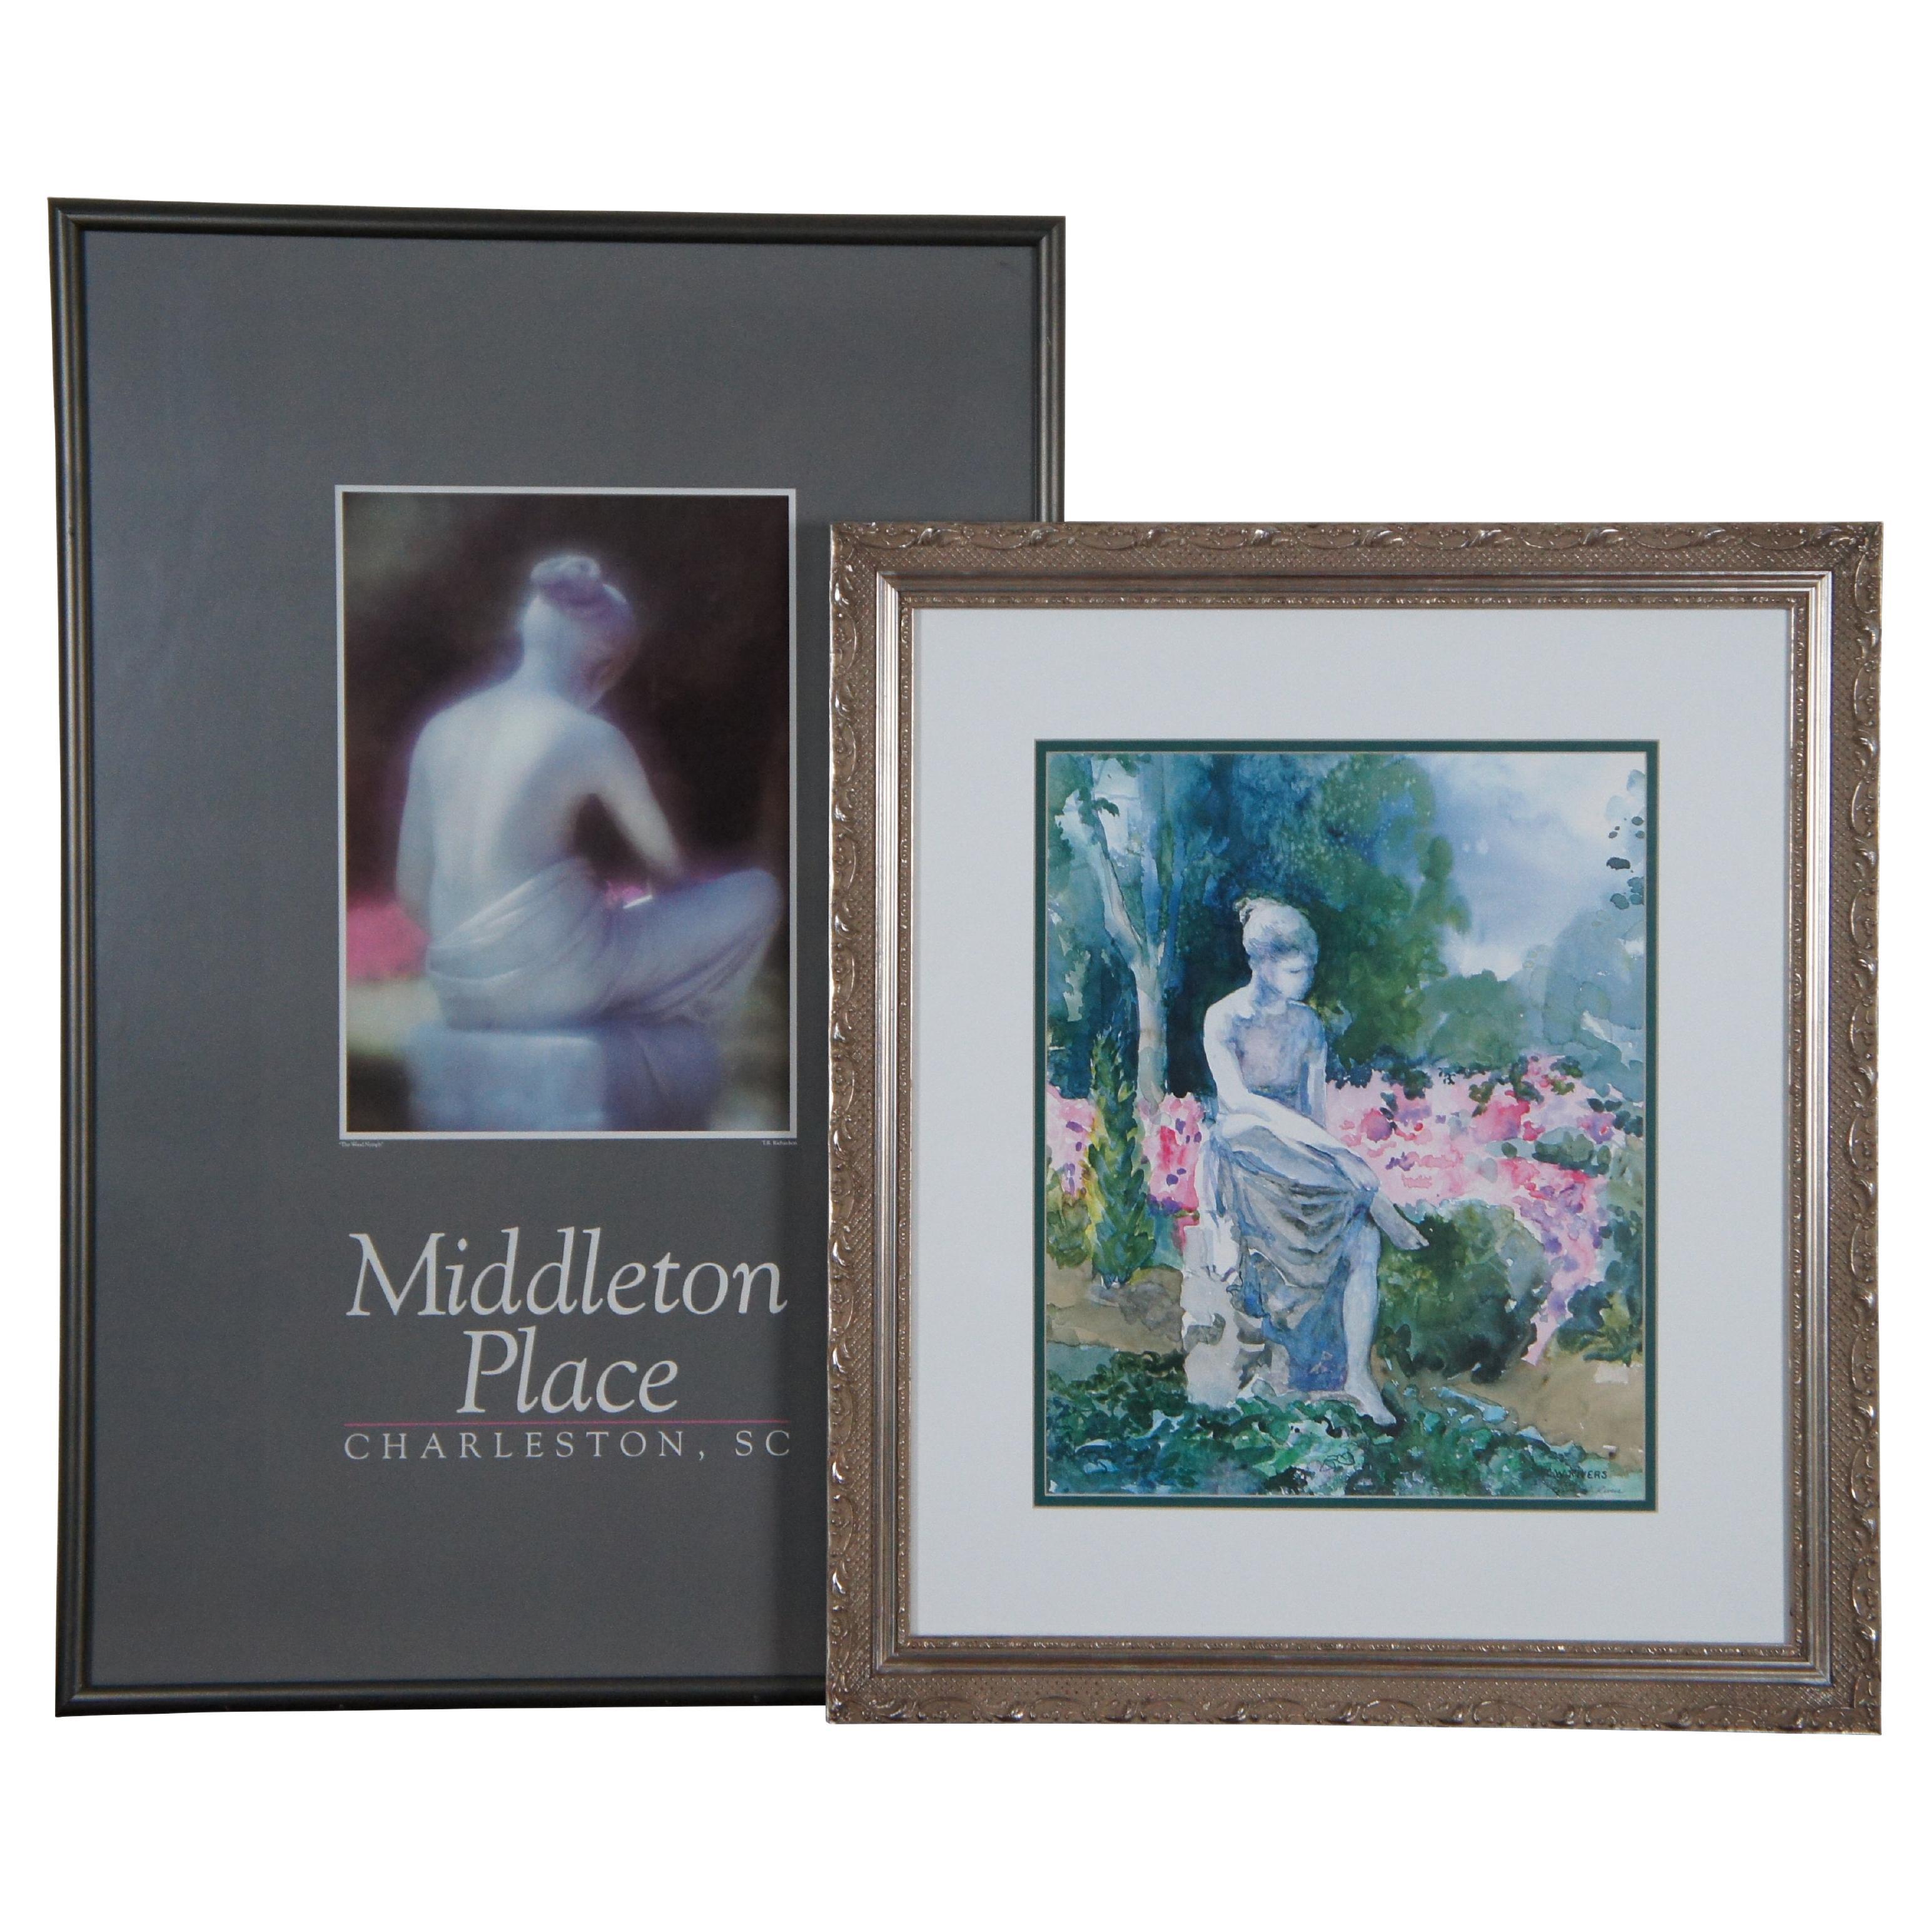 2 Middleton Place Wood Nymph Statue Framed Lithograph & Poster Print For Sale